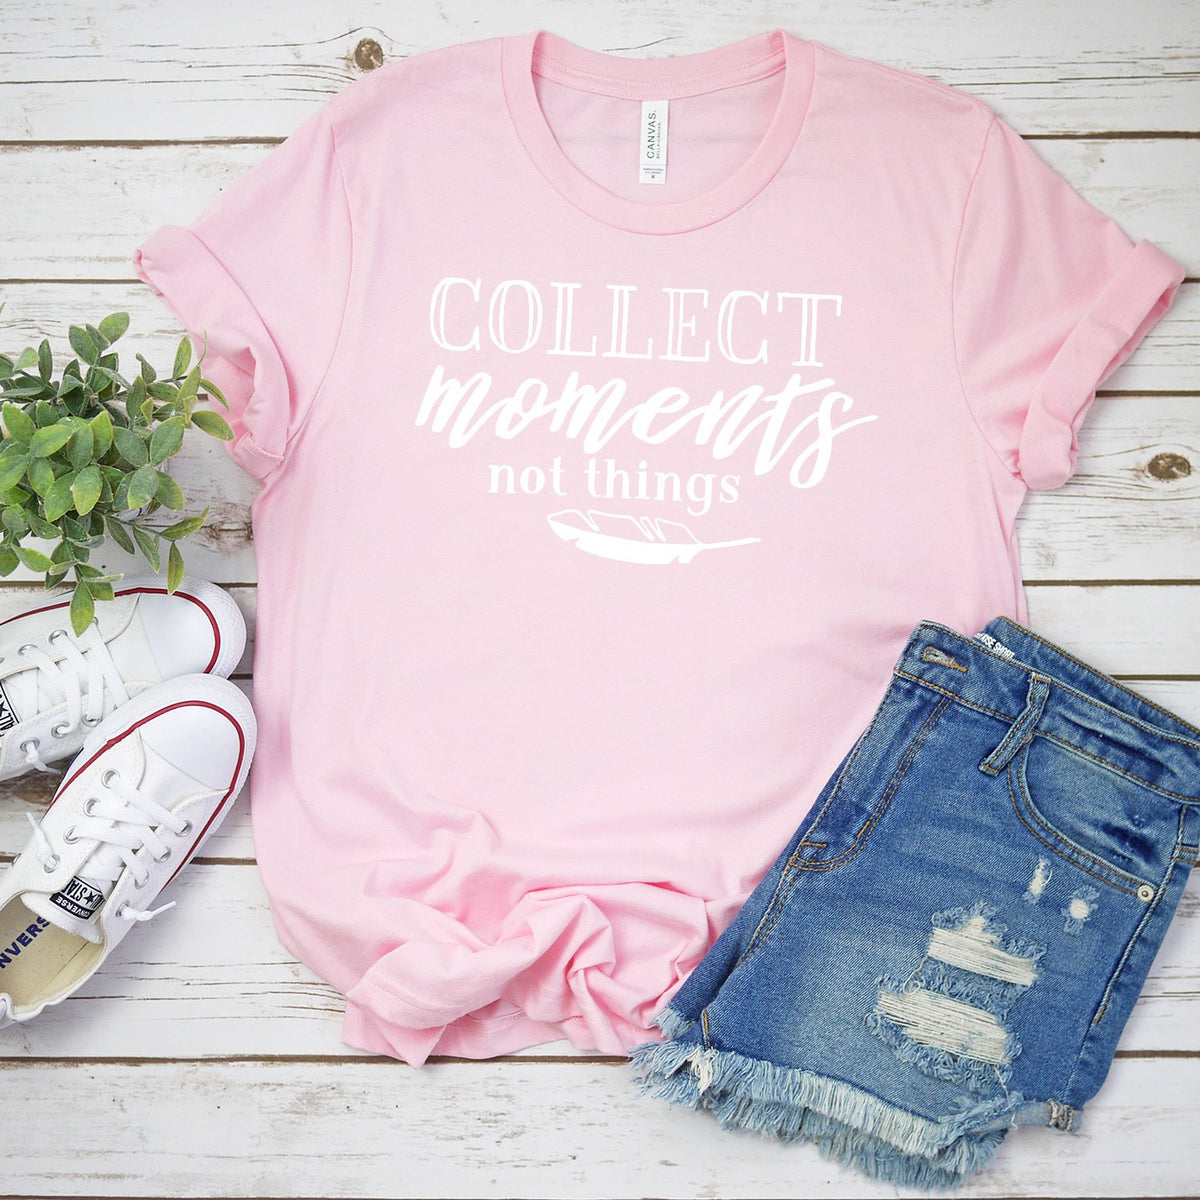 Collect Moments Not Things - Short Sleeve Tee Shirt